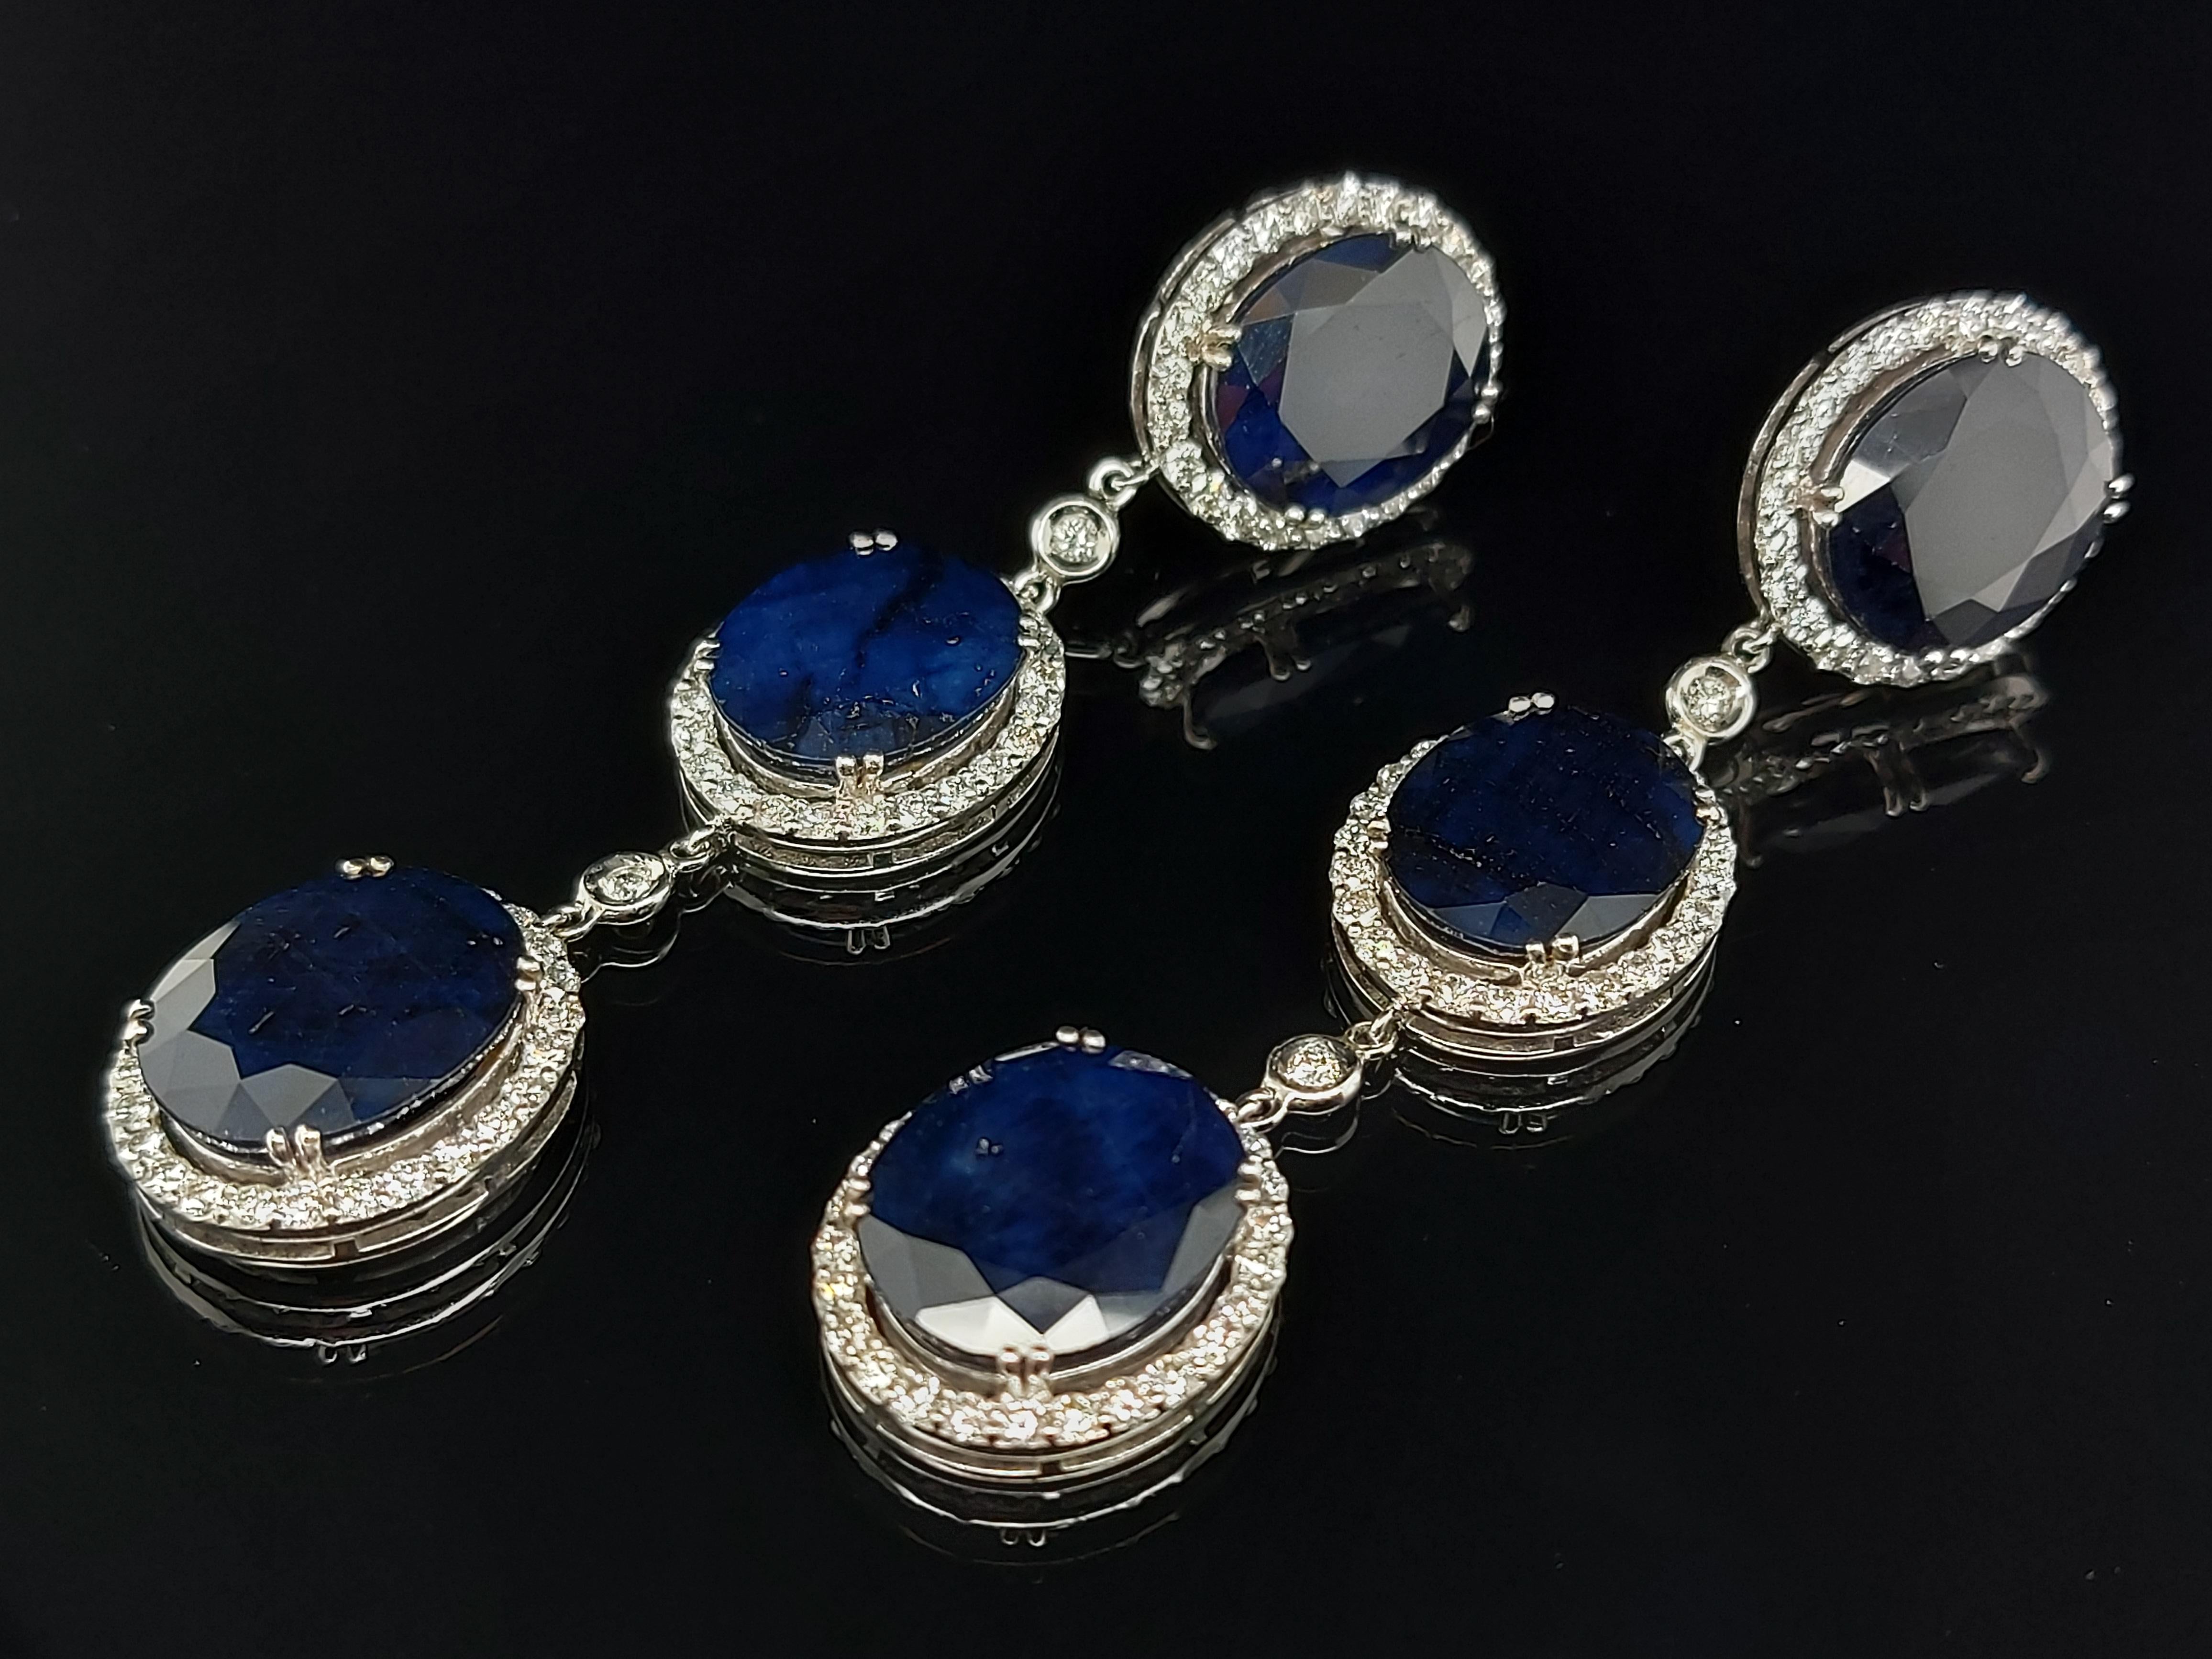 18kt White Gold Earrings 43.56ct Sapphire, 3.51ct Diamond For Sale 10